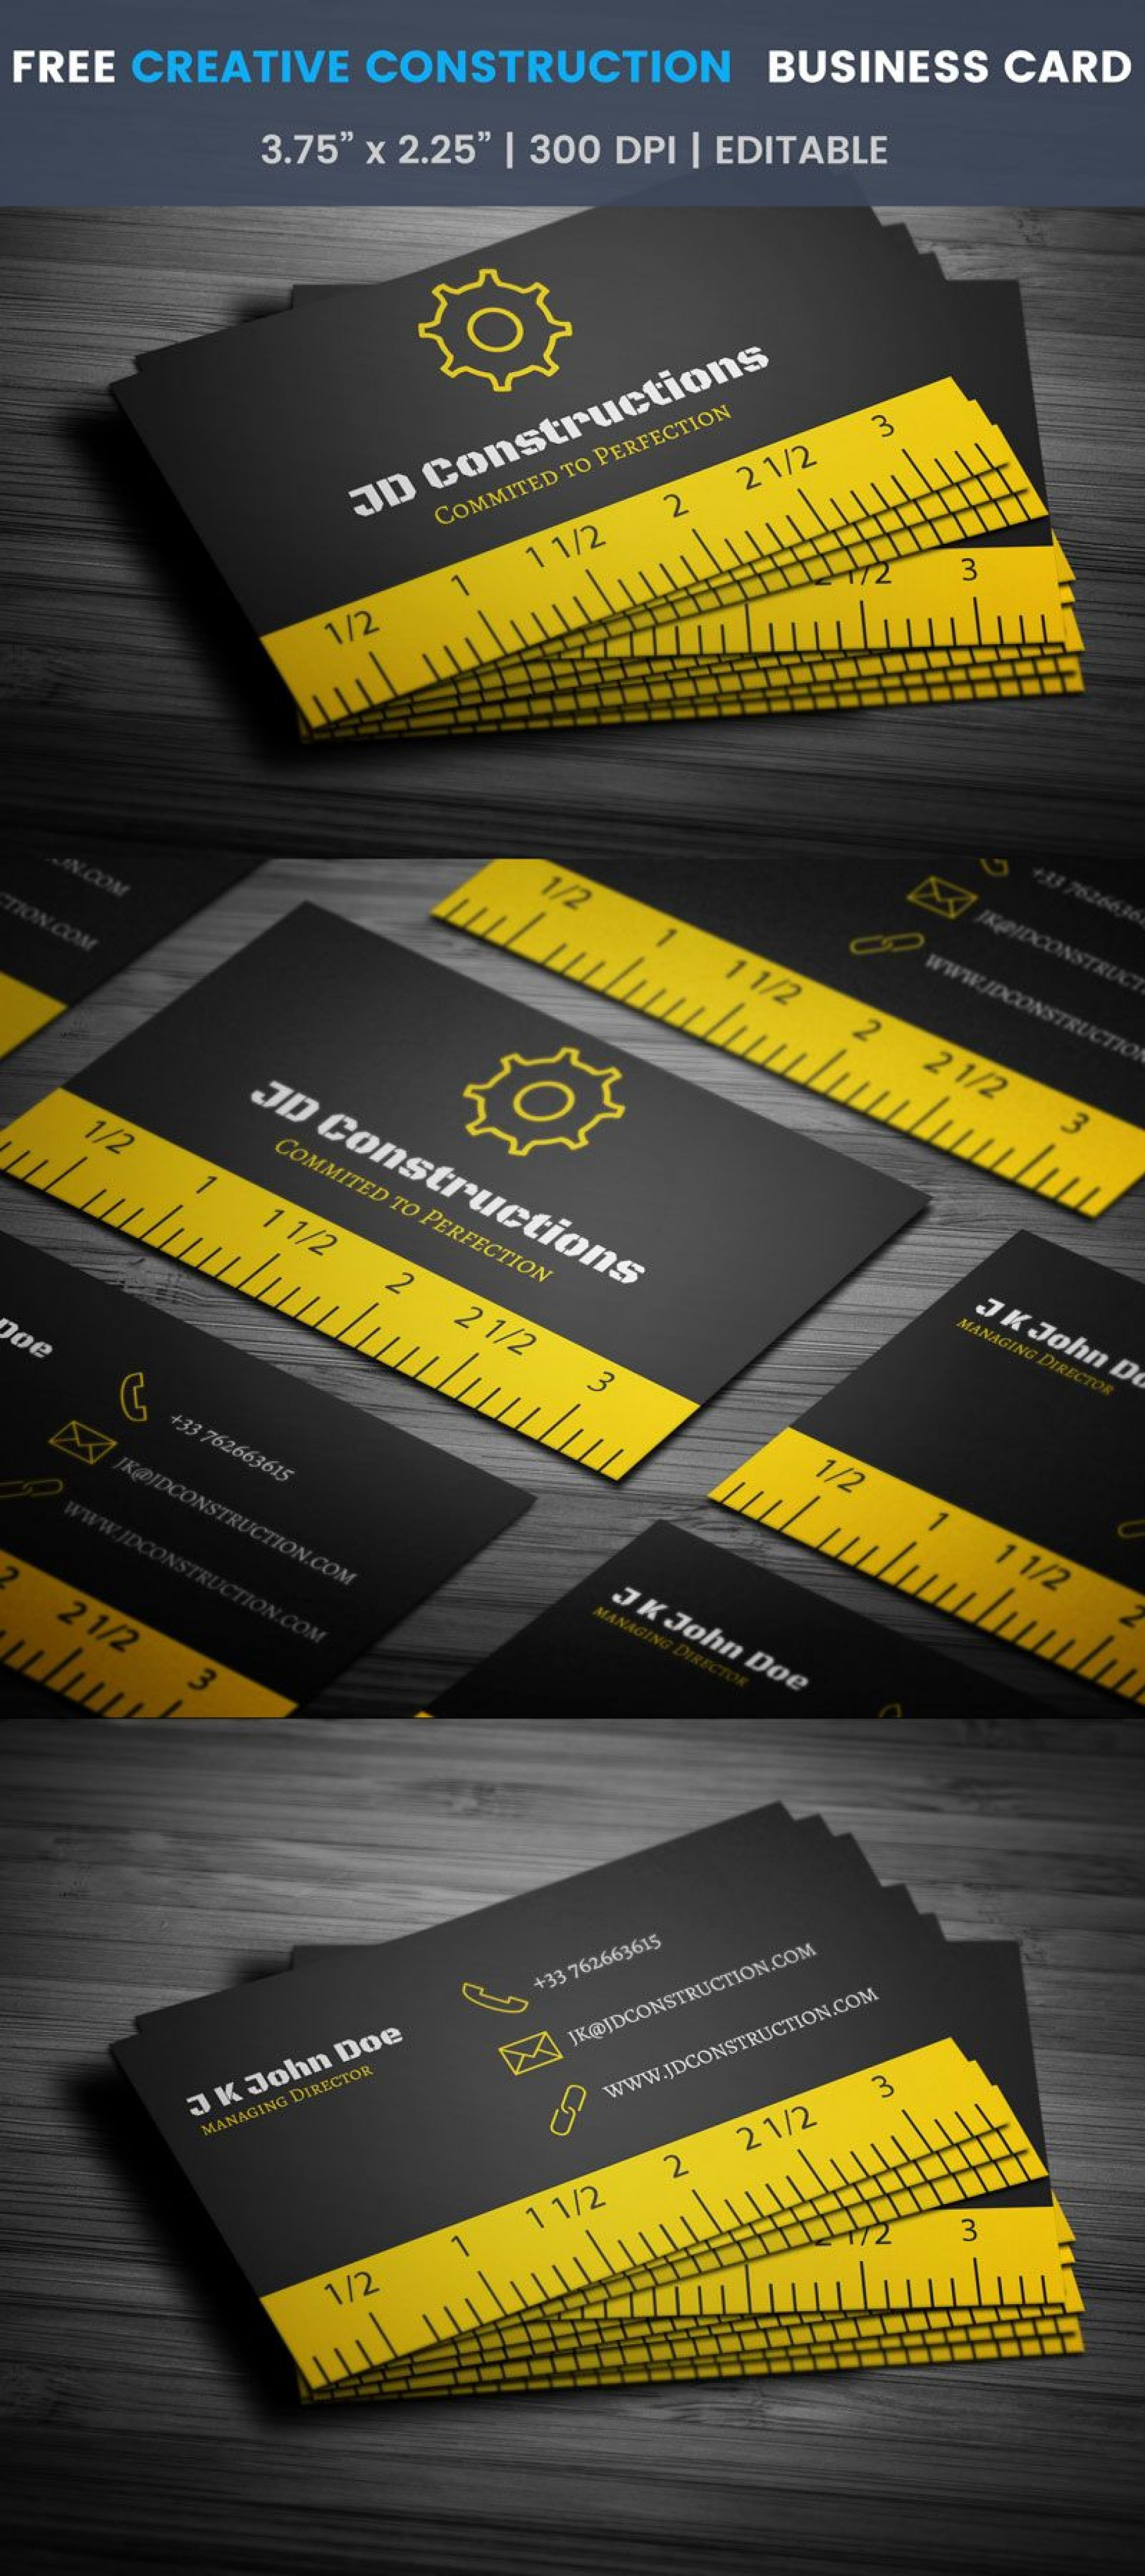 002 Construction Pany Business Card Template Ideas Of Funny Business Cards Templates